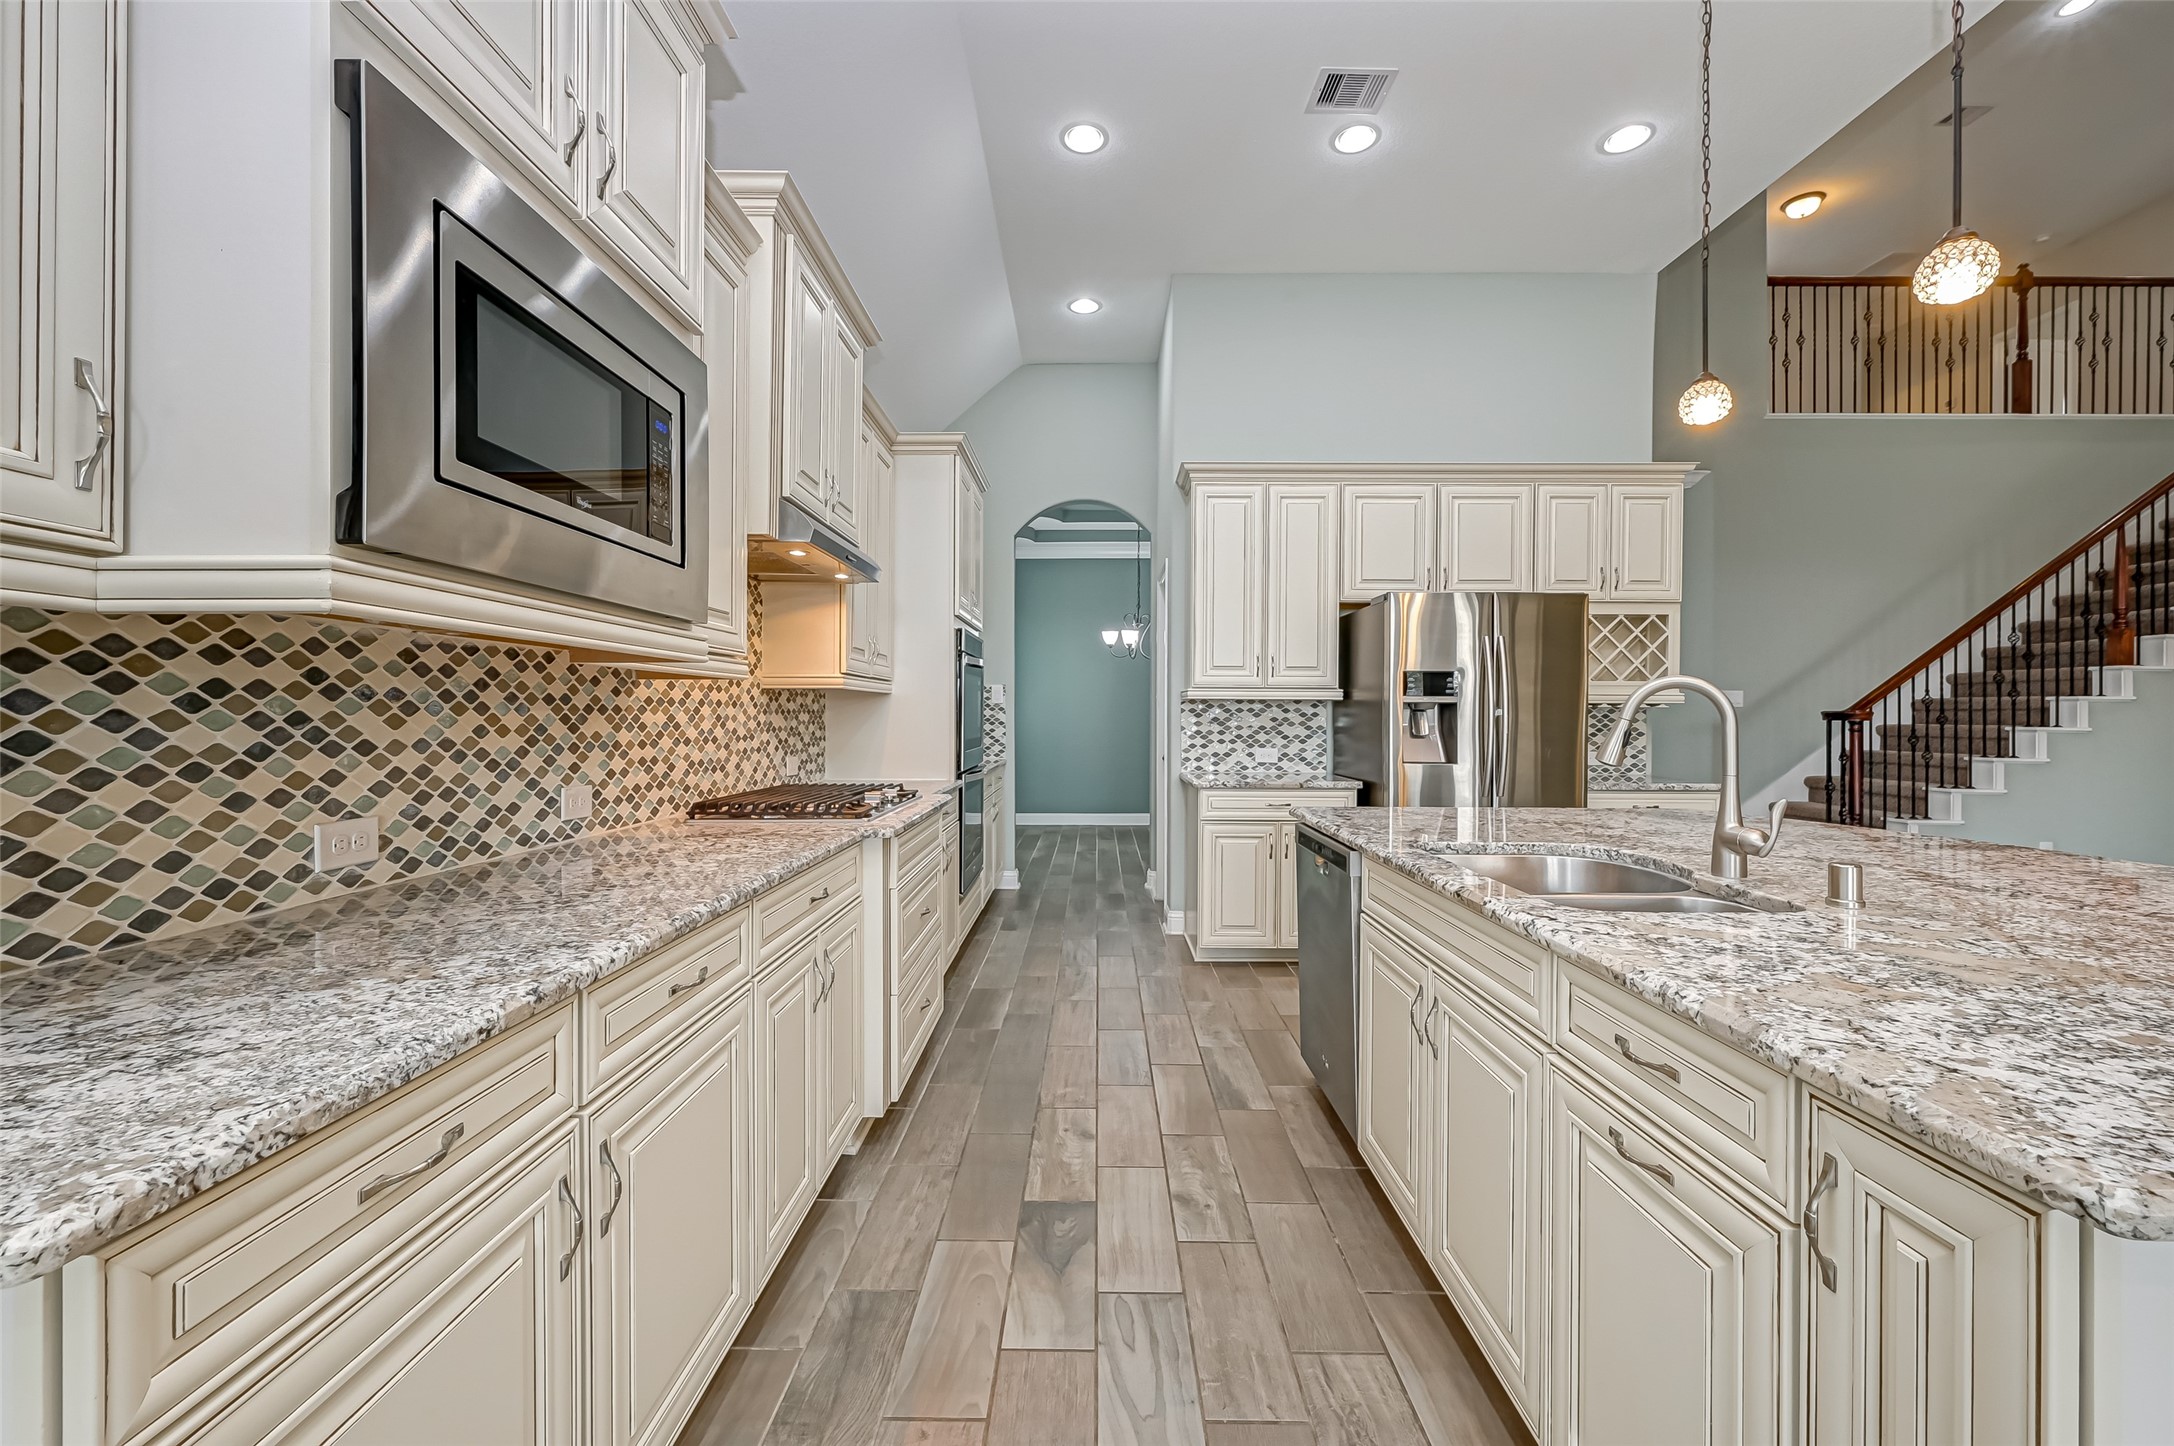 Kitchen features cream cabinets with granite countertops and stainless appliances for that timeless feel.